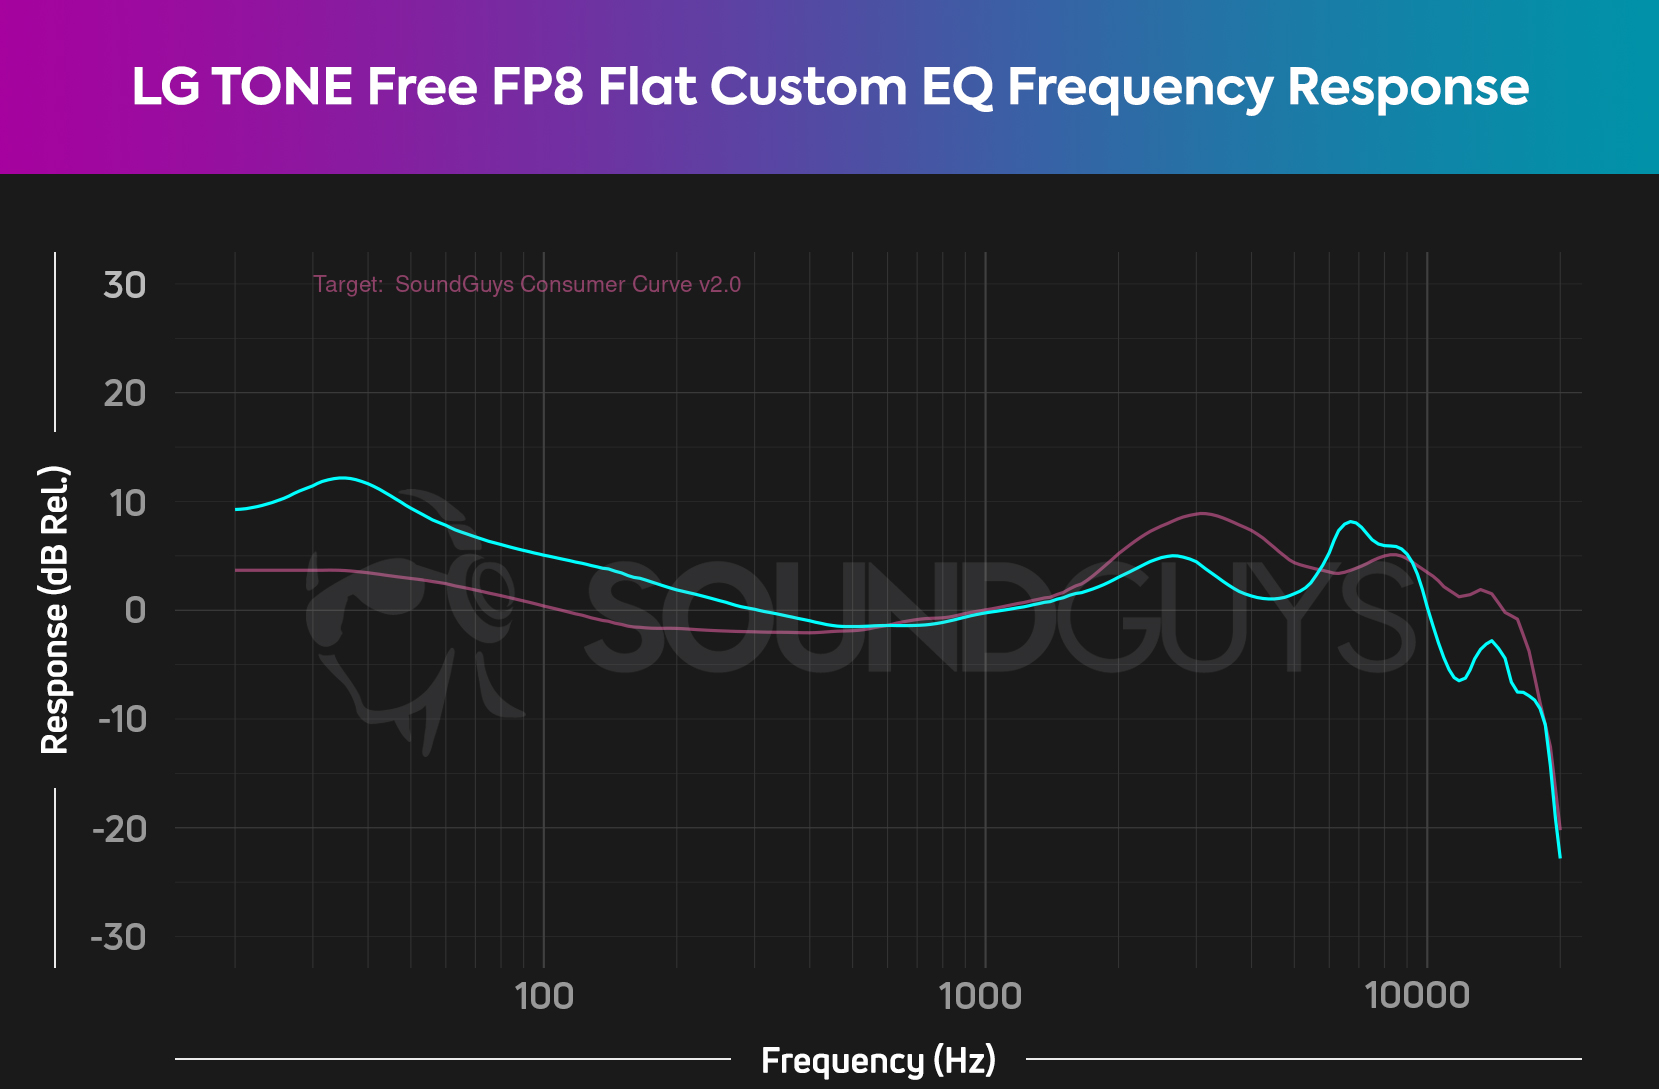 Frequency response graph for the default flat custom EQ frequency response of the LG TONE Free FP8.